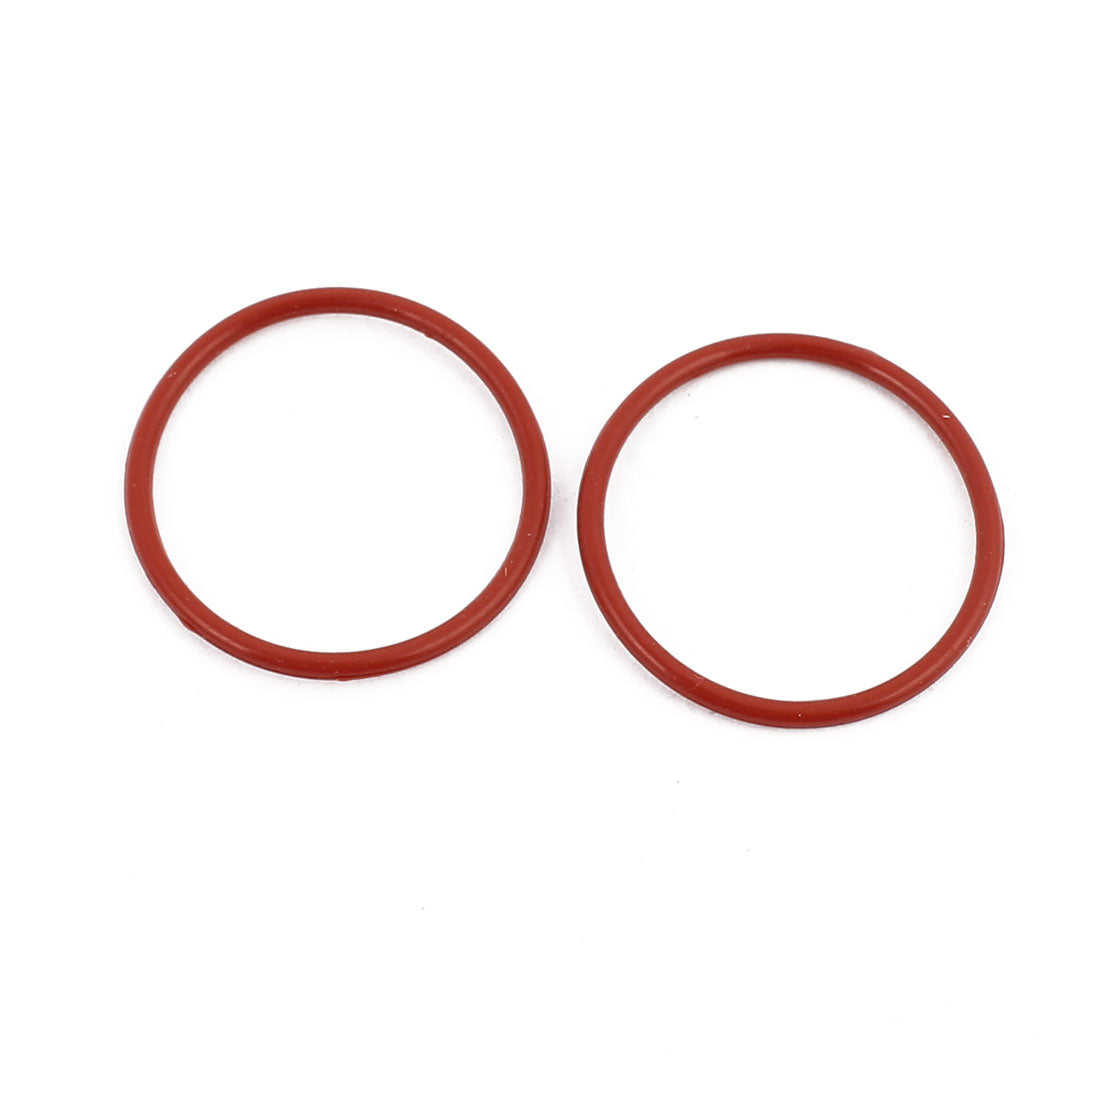 uxcell Uxcell 20Pcs 24mm x 1.5mm Rubber O-rings NBR Heat Resistant Sealing Ring Grommets Red